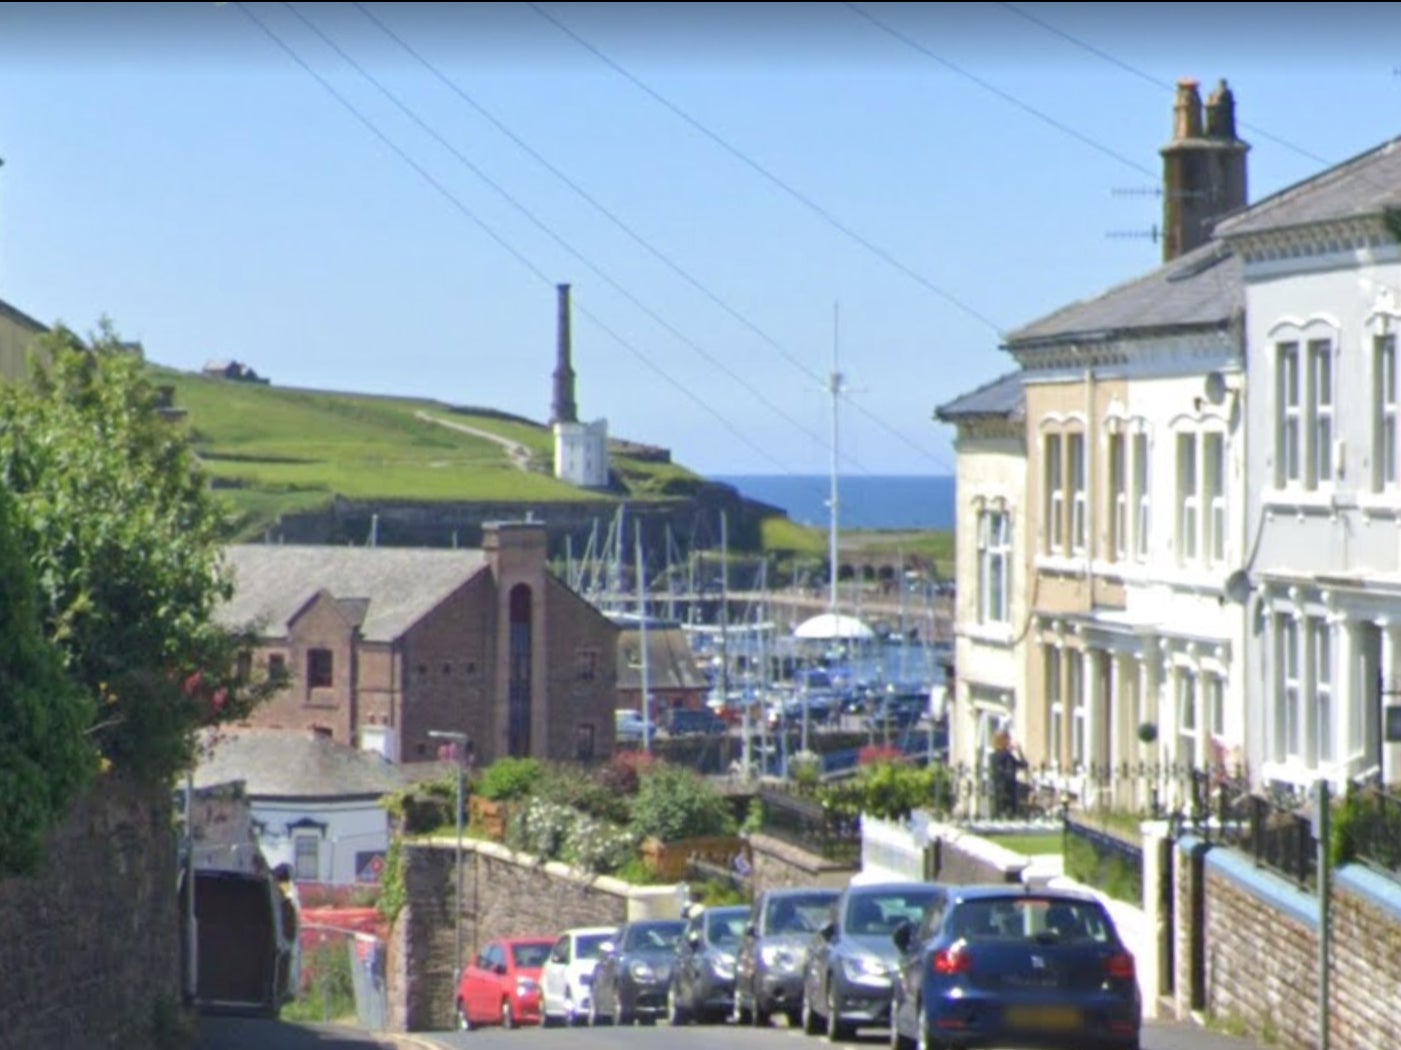 A view of part of Wellington Row in Whitehaven, Cumbria